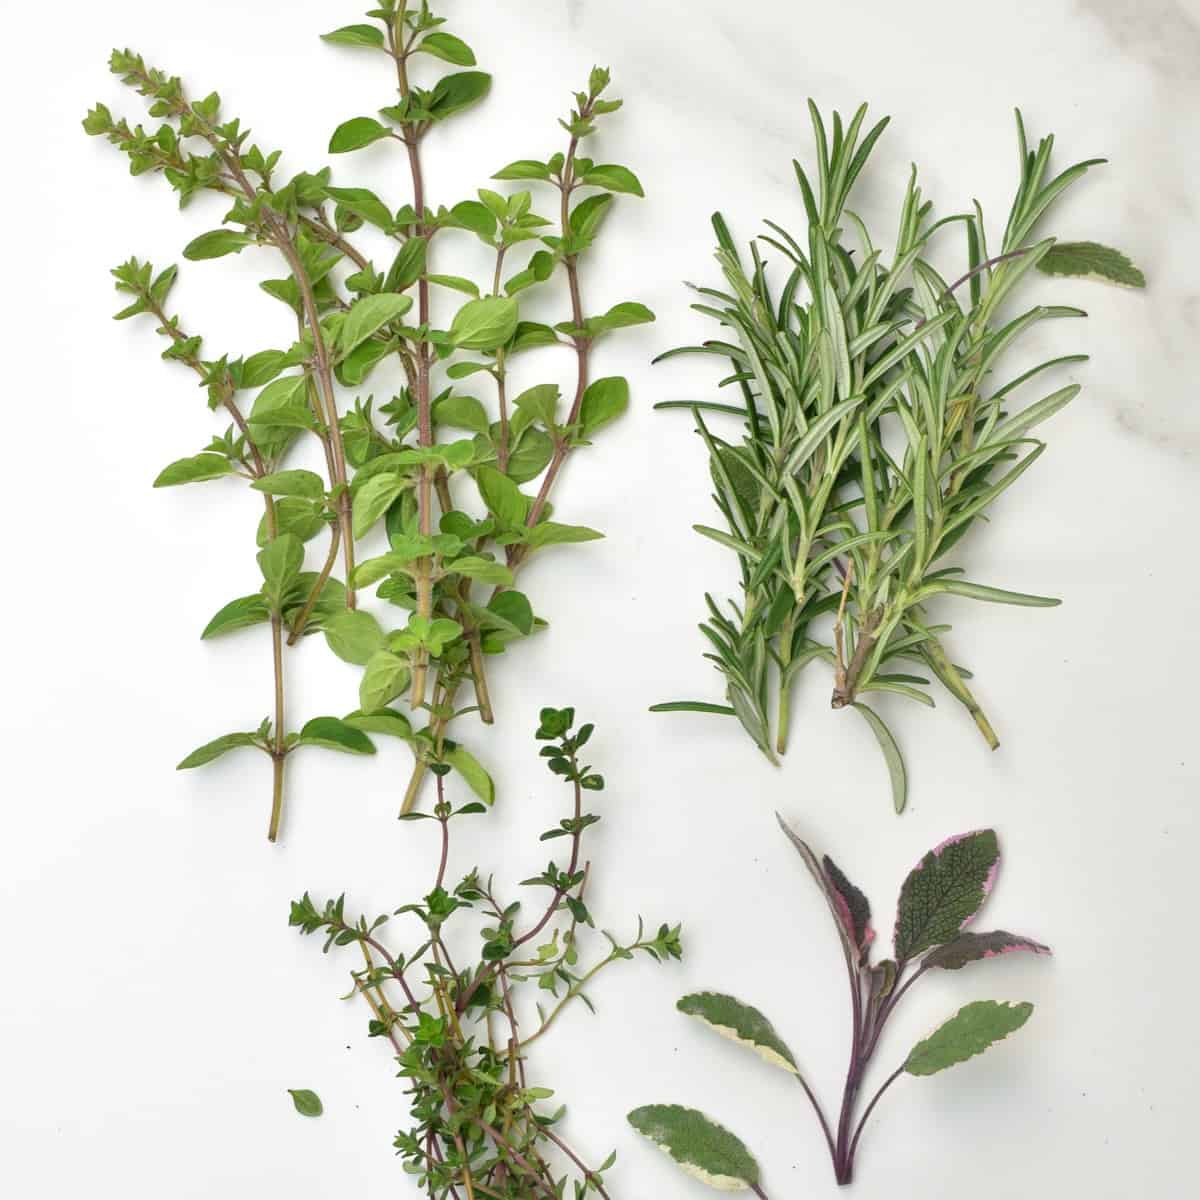 Small bunches of different fresh herbs